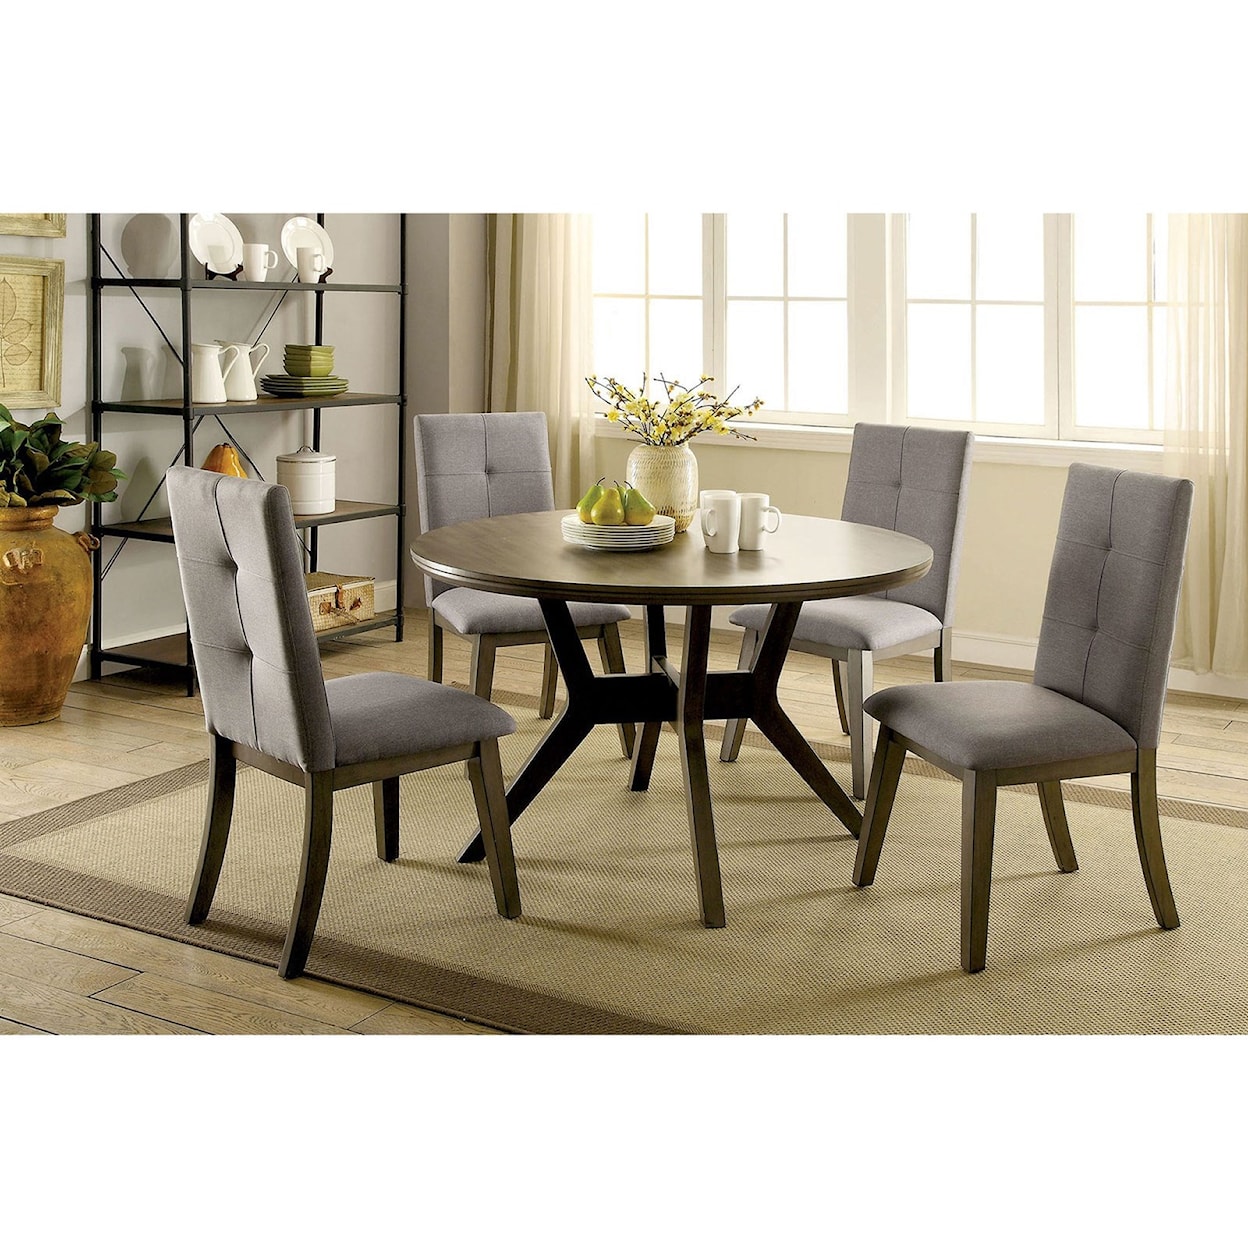 FUSA Abelone Table + 4 Chairs